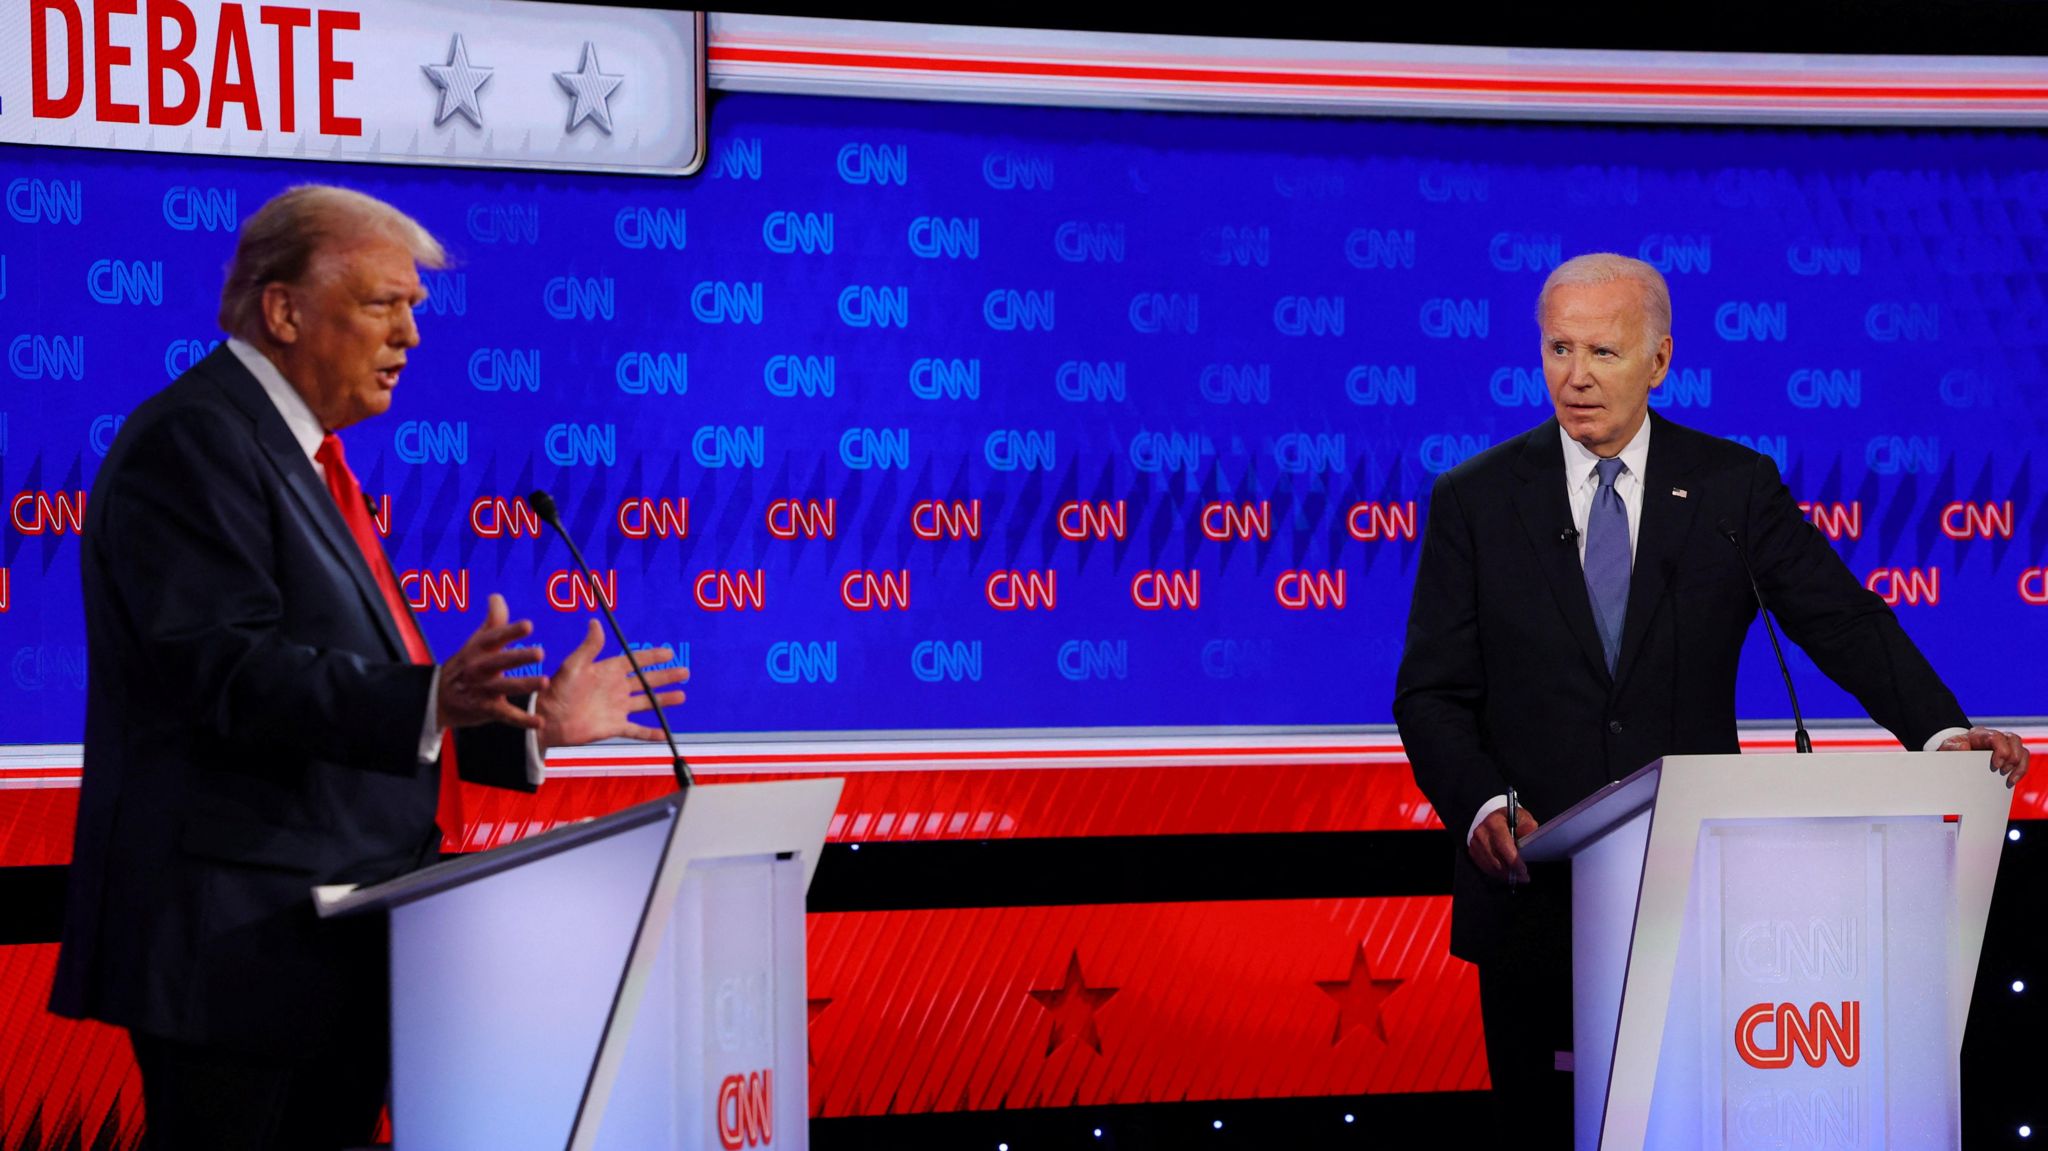 Doggett calls for Biden to withdraw after the debacle at the presidential debate - Donald Trump and Joe Biden at the debate June 27